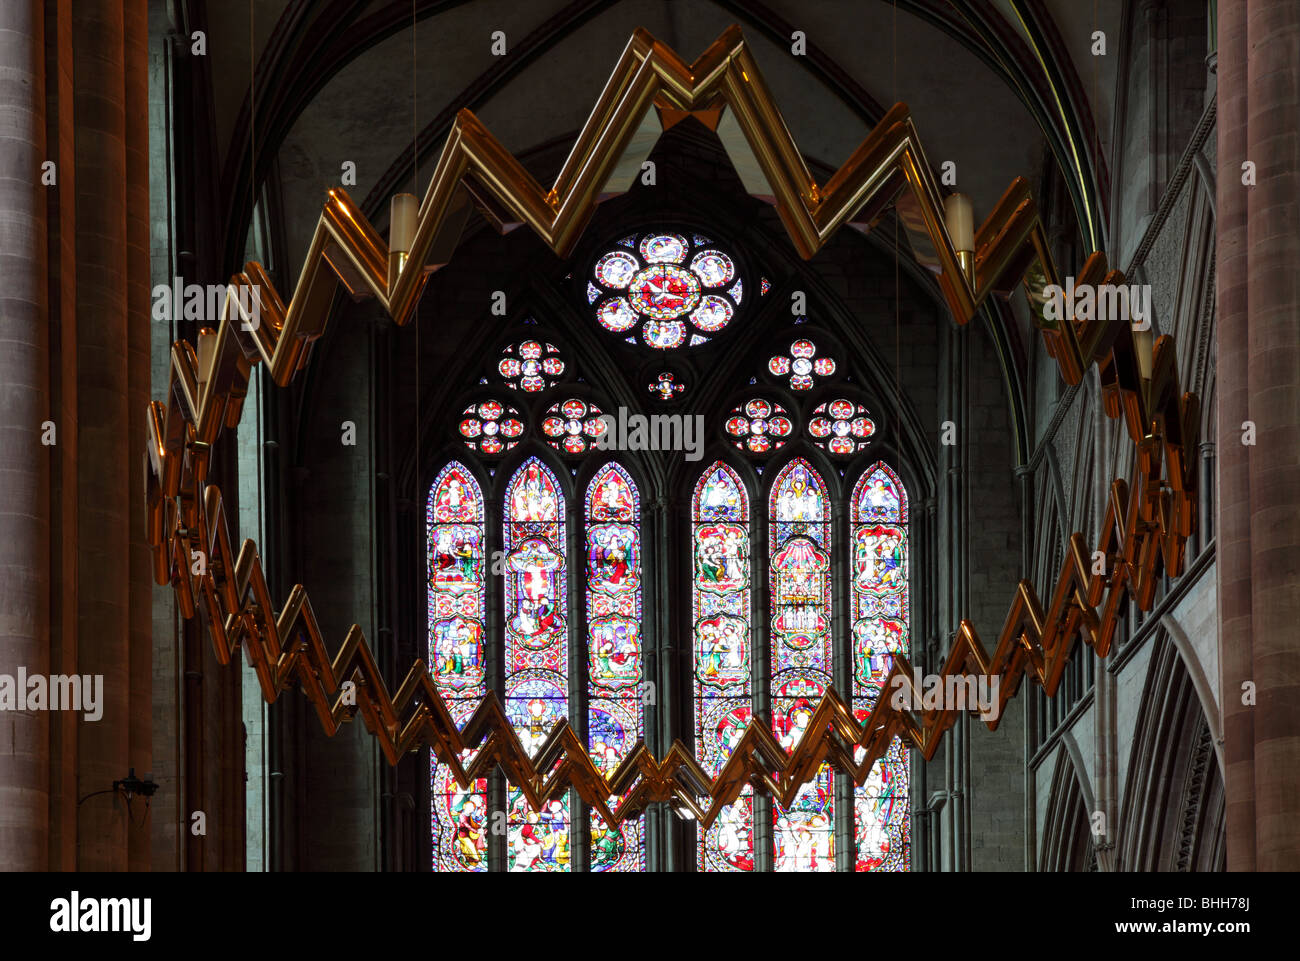 The Hereford Corona situated above the Altar Table in Hereford Cathedral. Stock Photo